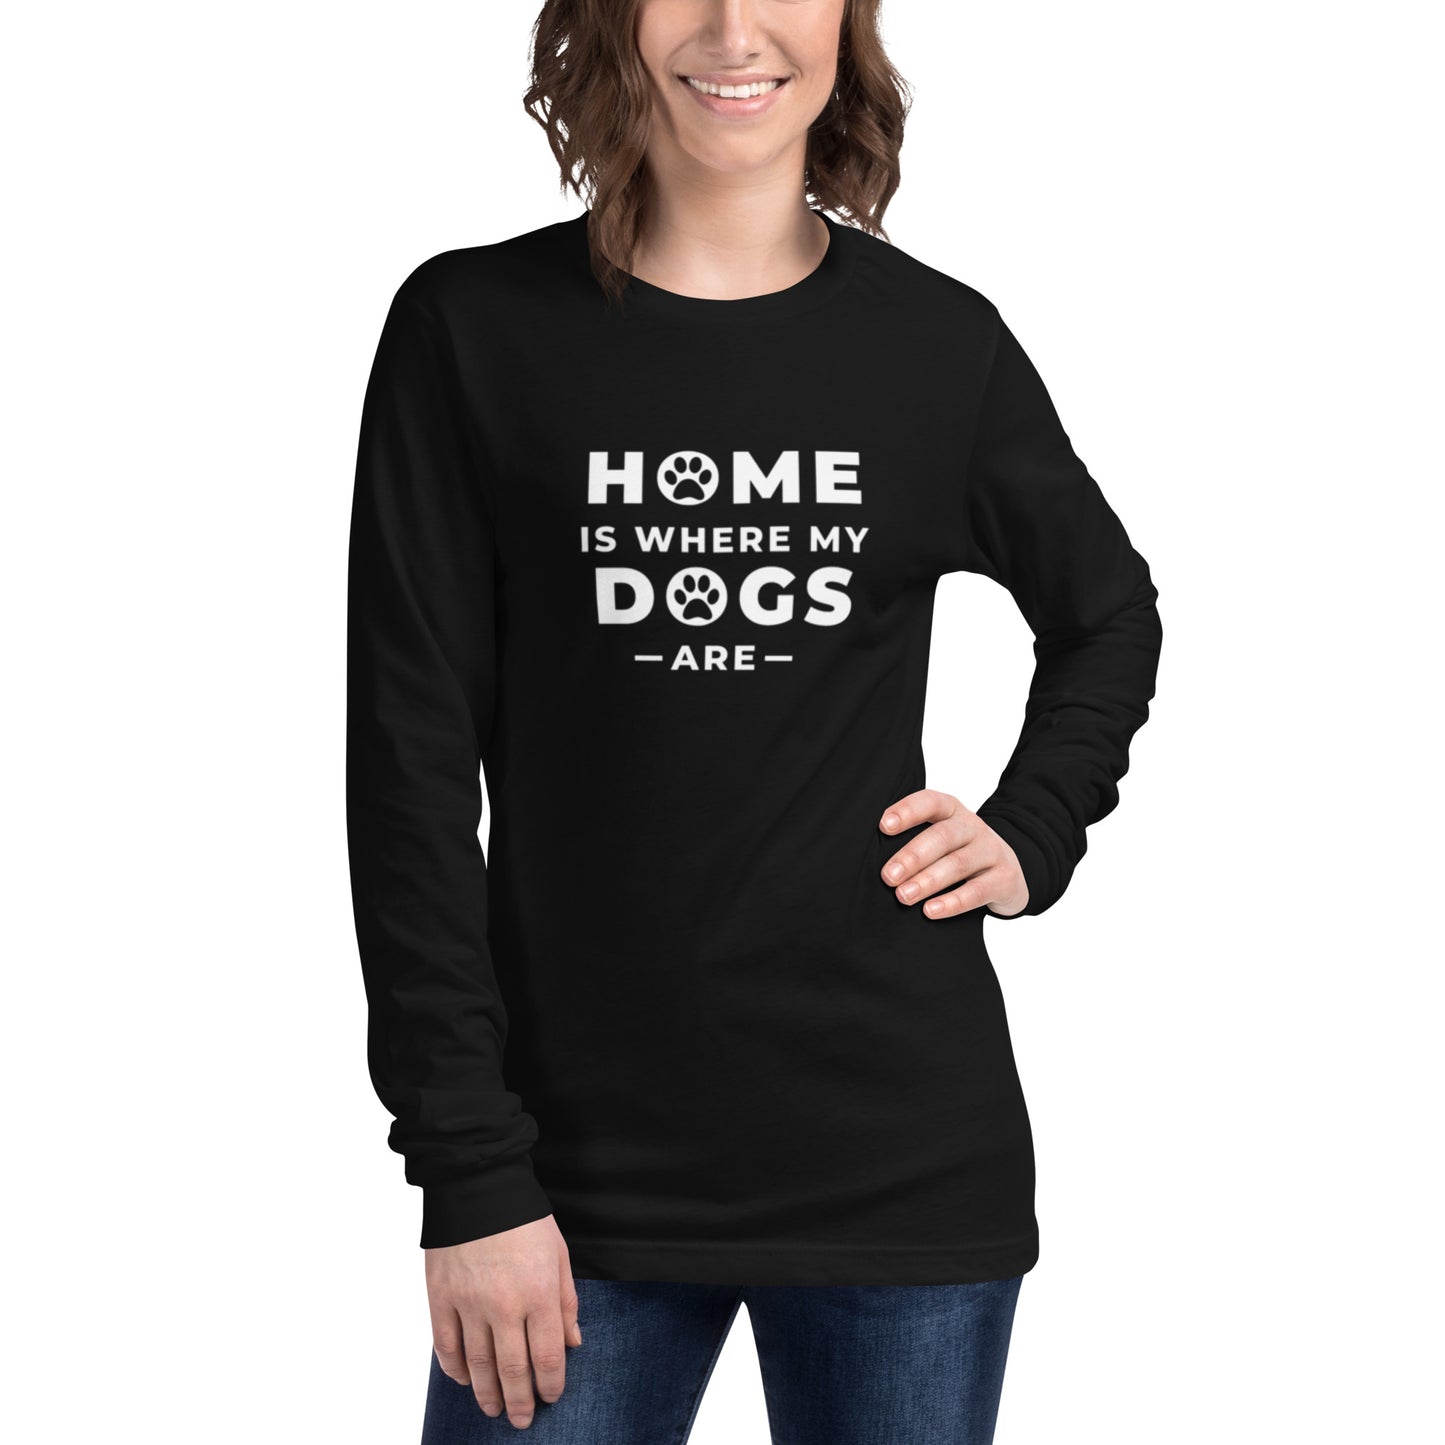 Long sleeve t-shirt with "Home is where my dogs are" printed on front